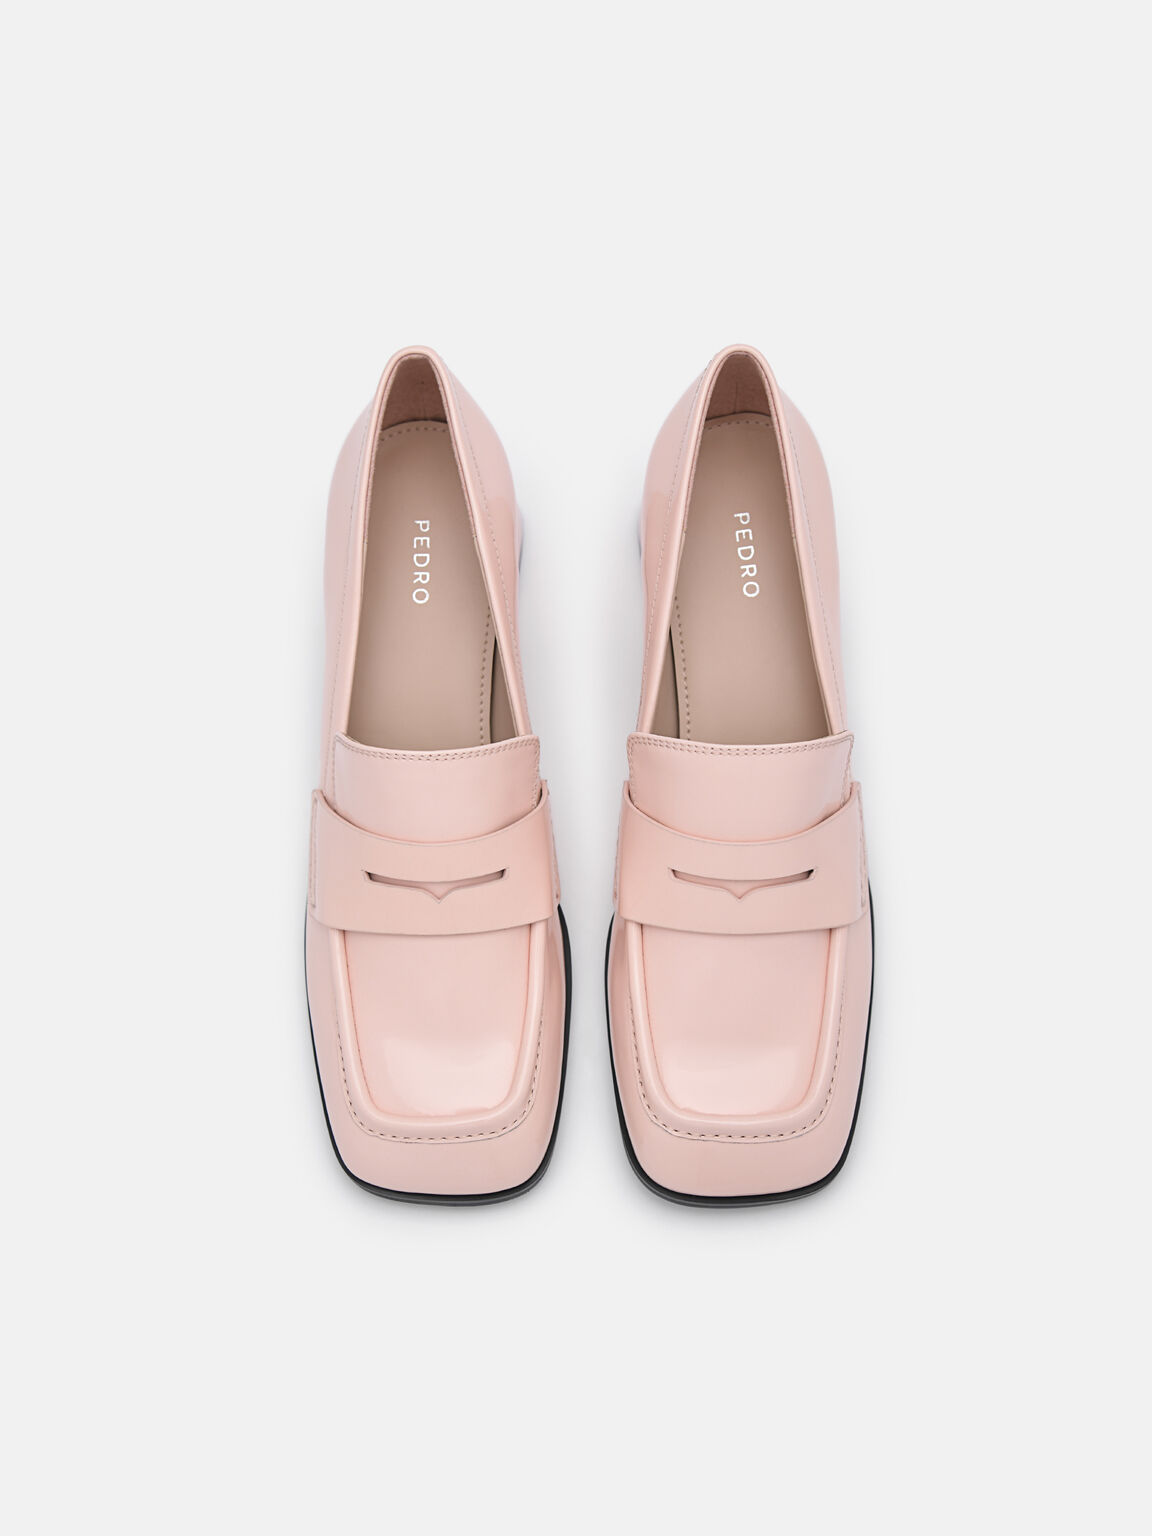 Maggie Leather Heel Loafers, Blush